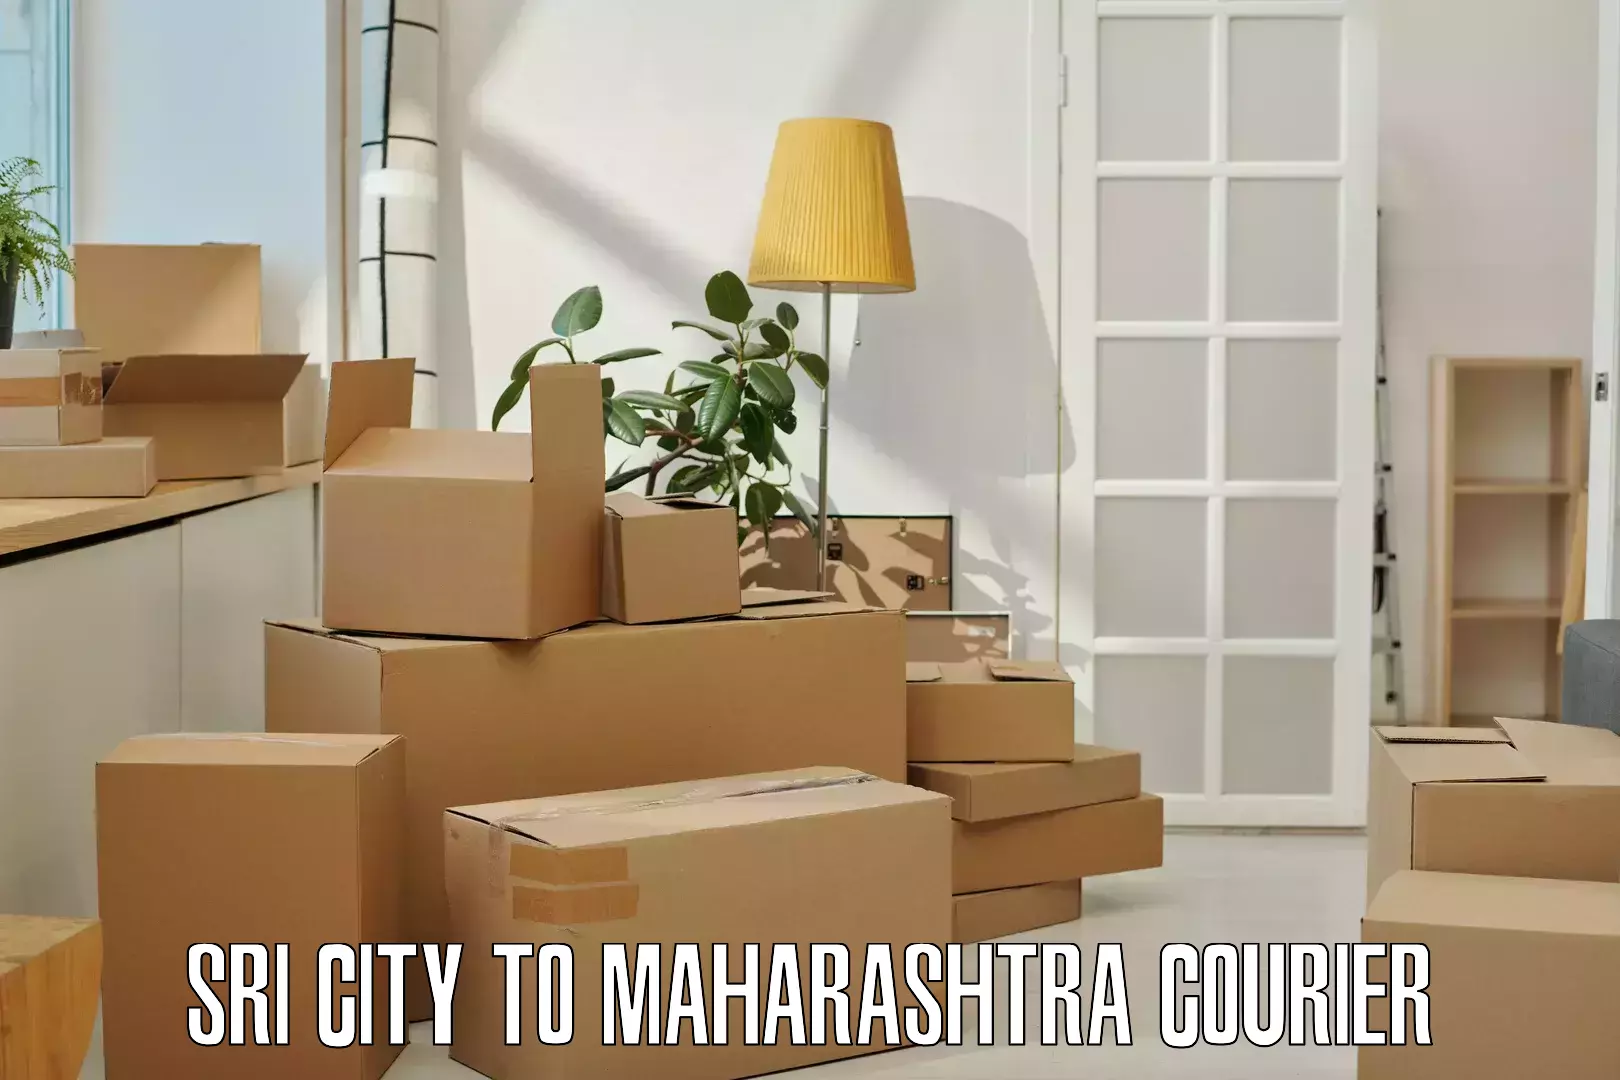 Specialized courier services Sri City to Chinchbunder